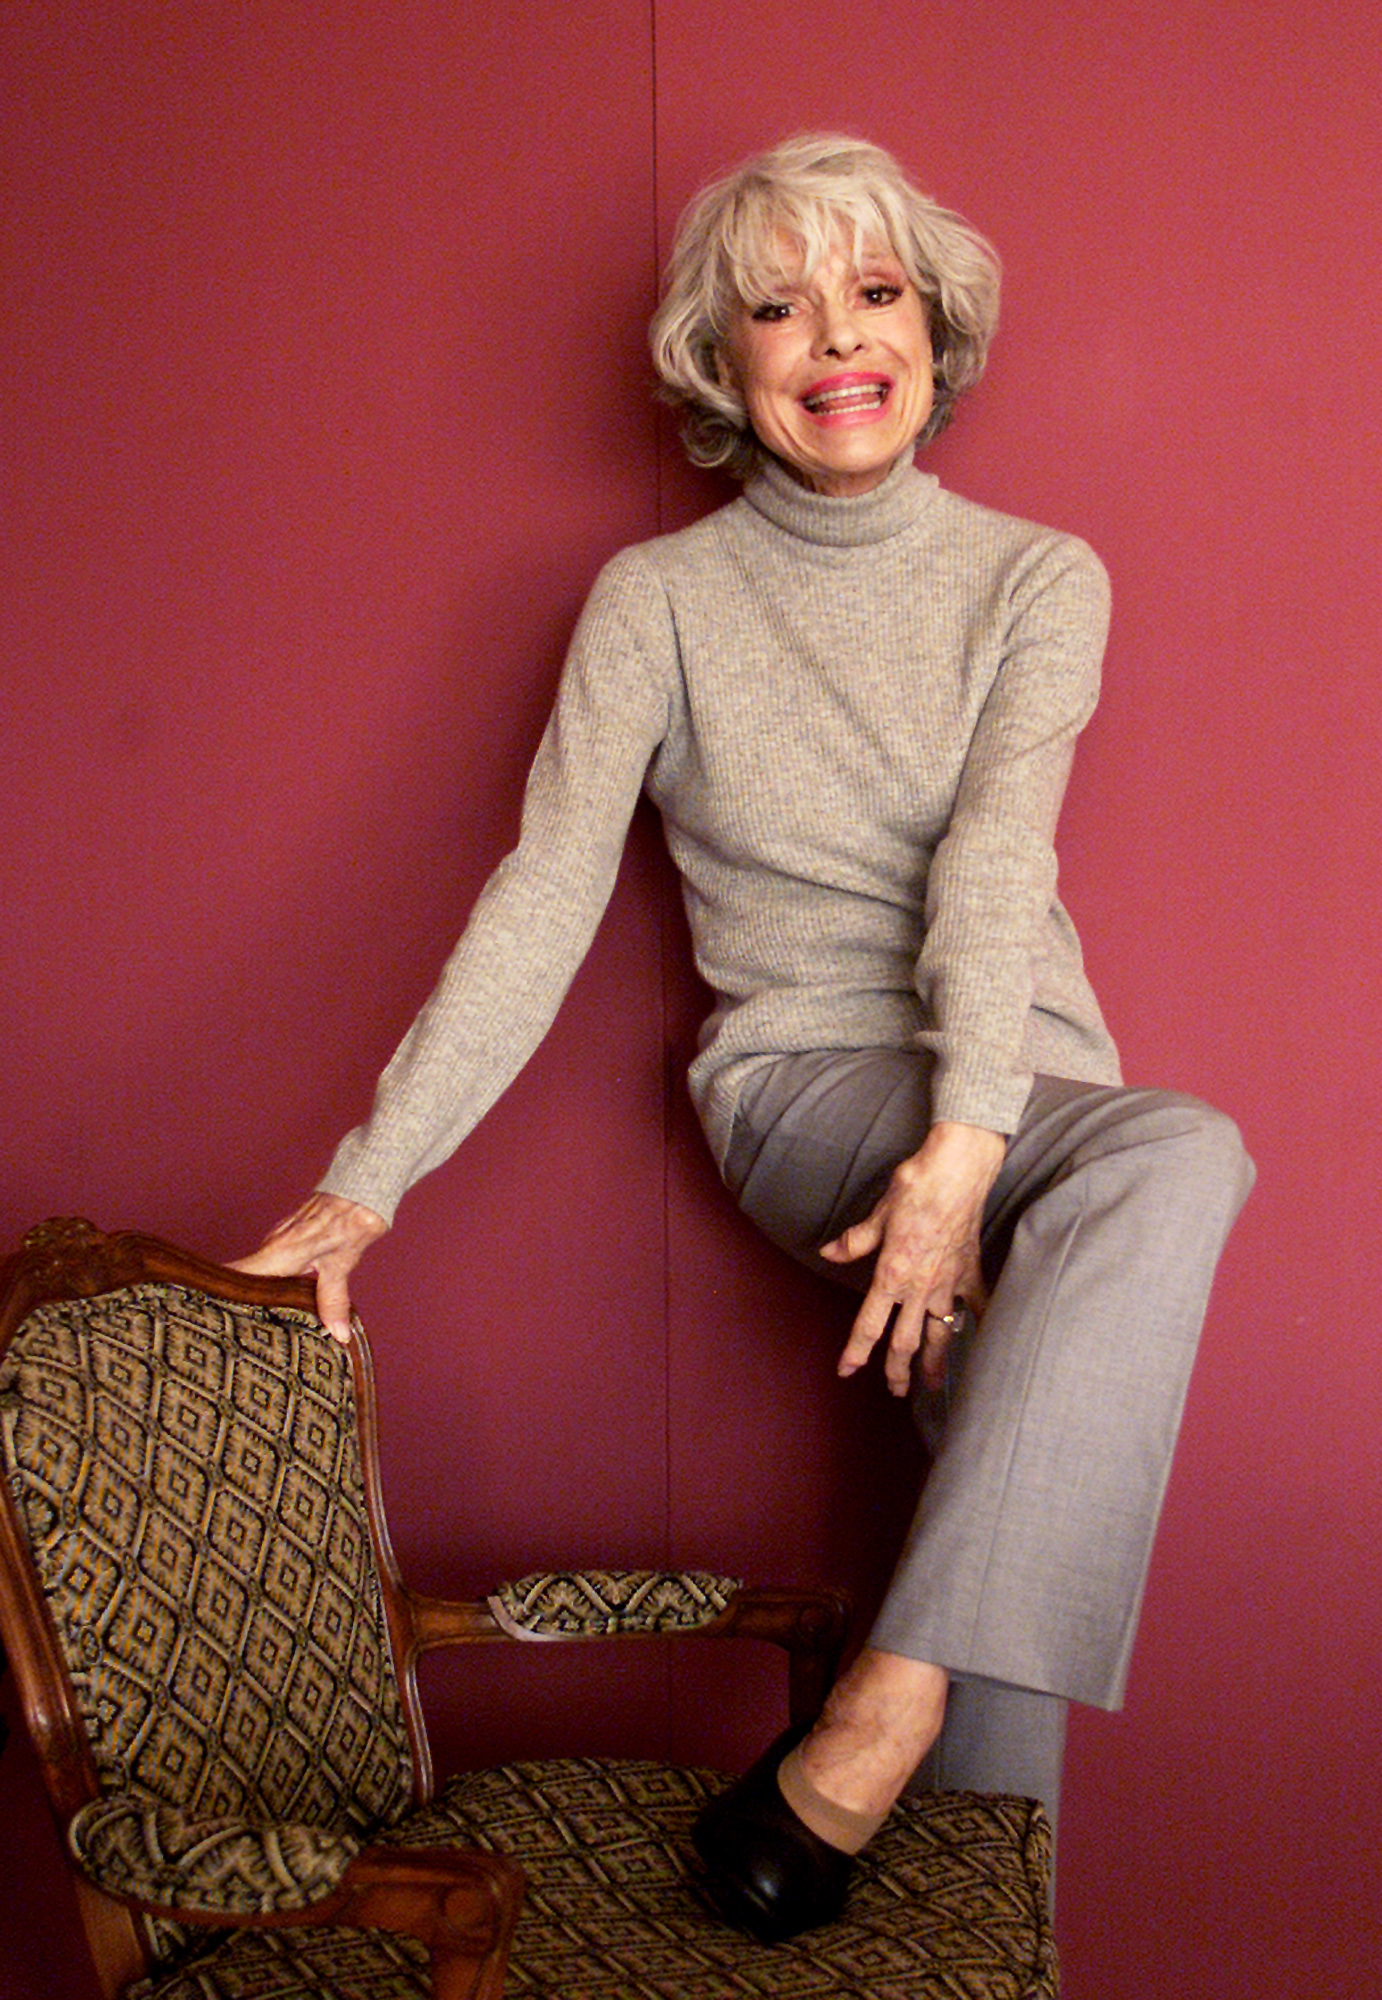 PHOTO: Actress Carol Channing, best known for her roles in "Gentlemen Prefer Blondes" and "Hello, Dolly!" poses for the camera during an interview at the Beverly Hilton Hotel, in Beverly Hills, California, Sept. 18, 2002. 